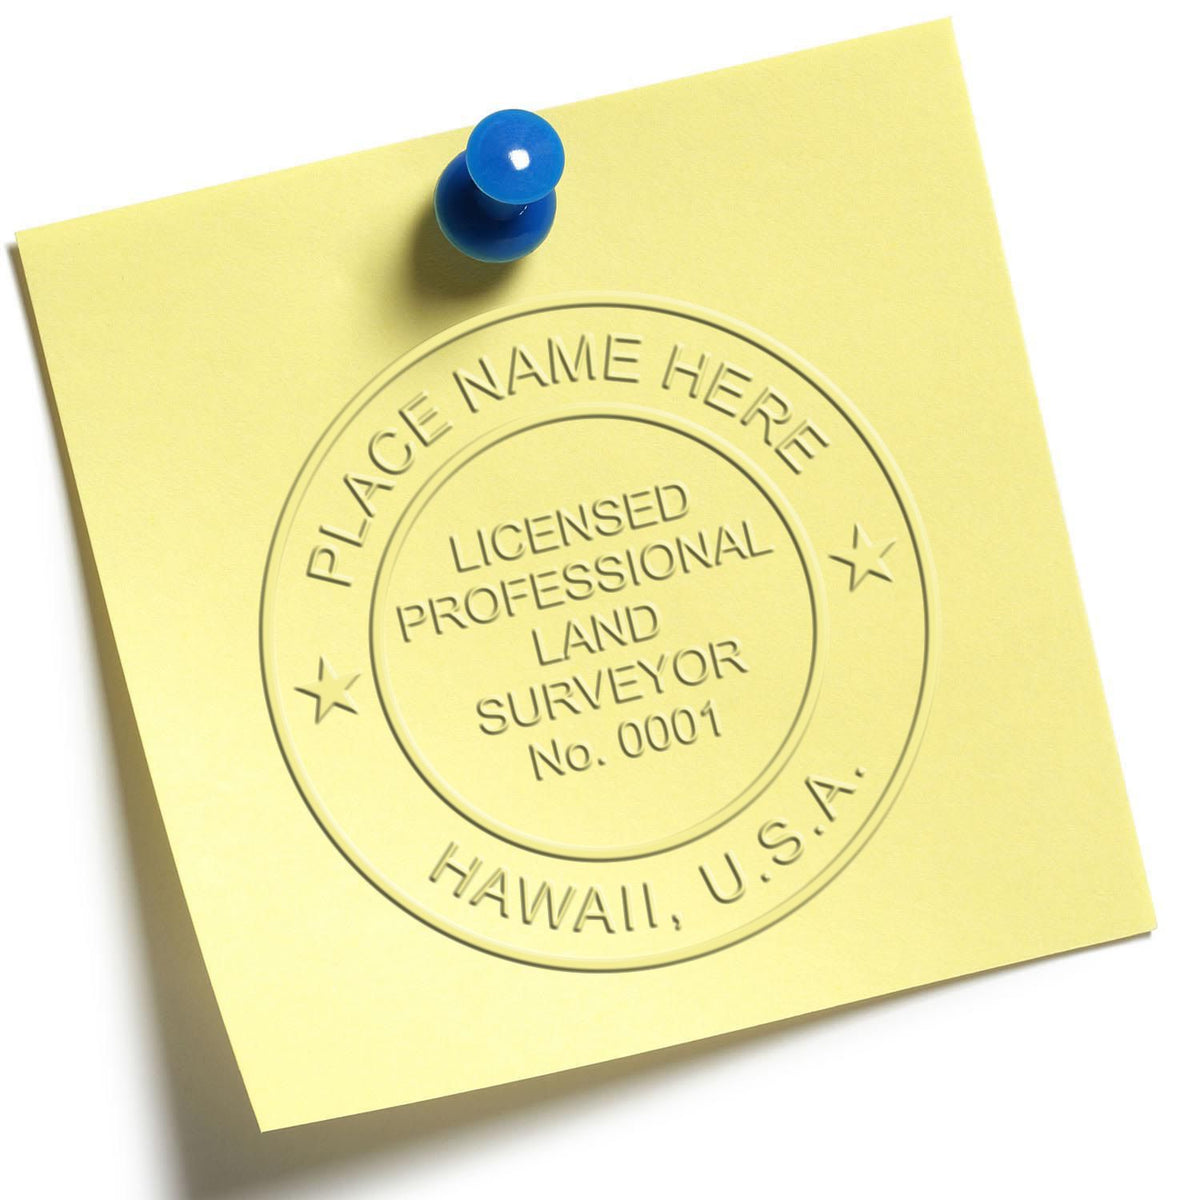 Another Example of a stamped impression of the State of Hawaii Soft Land Surveyor Embossing Seal on a piece of office paper.